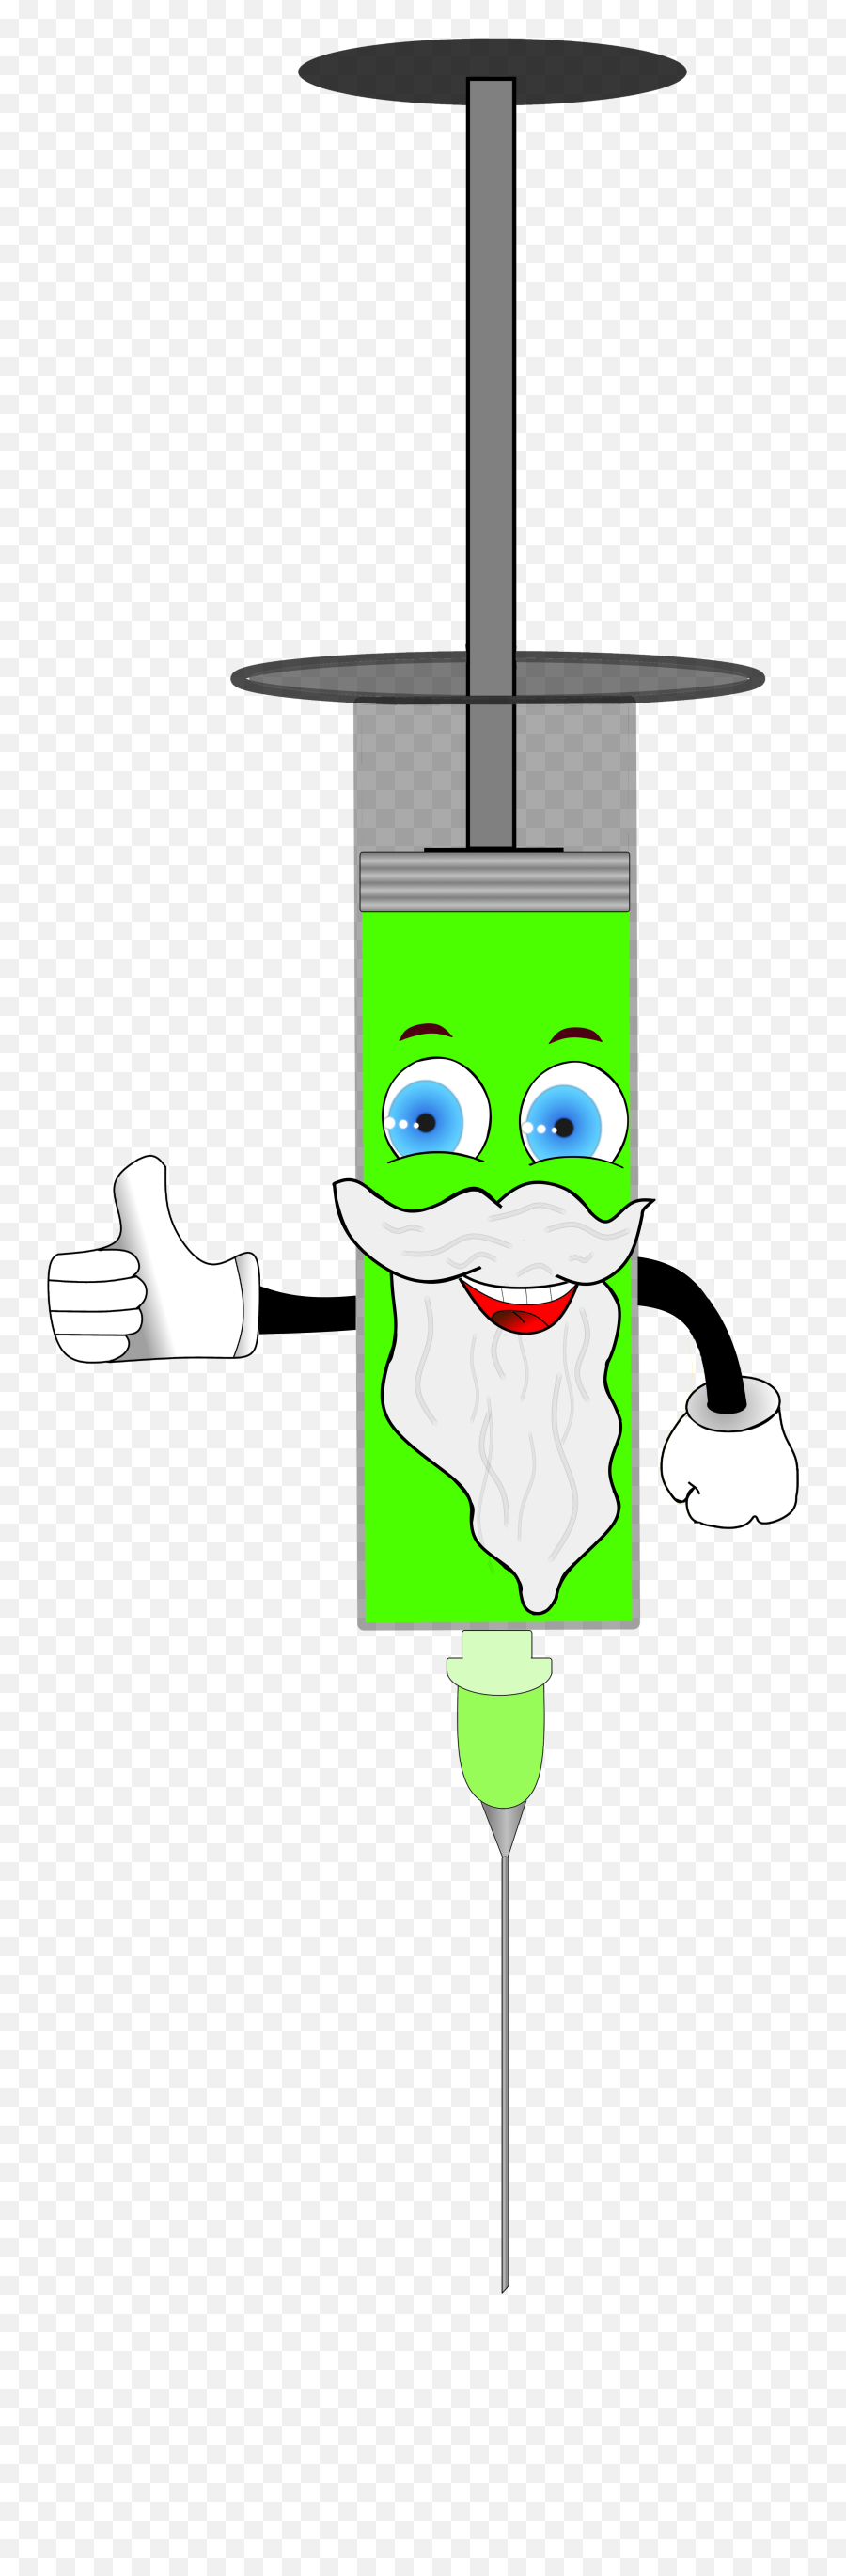 Syringe With The Green Liquid And Smiling Bearded Face At Emoji,Smiling Faces Clipart